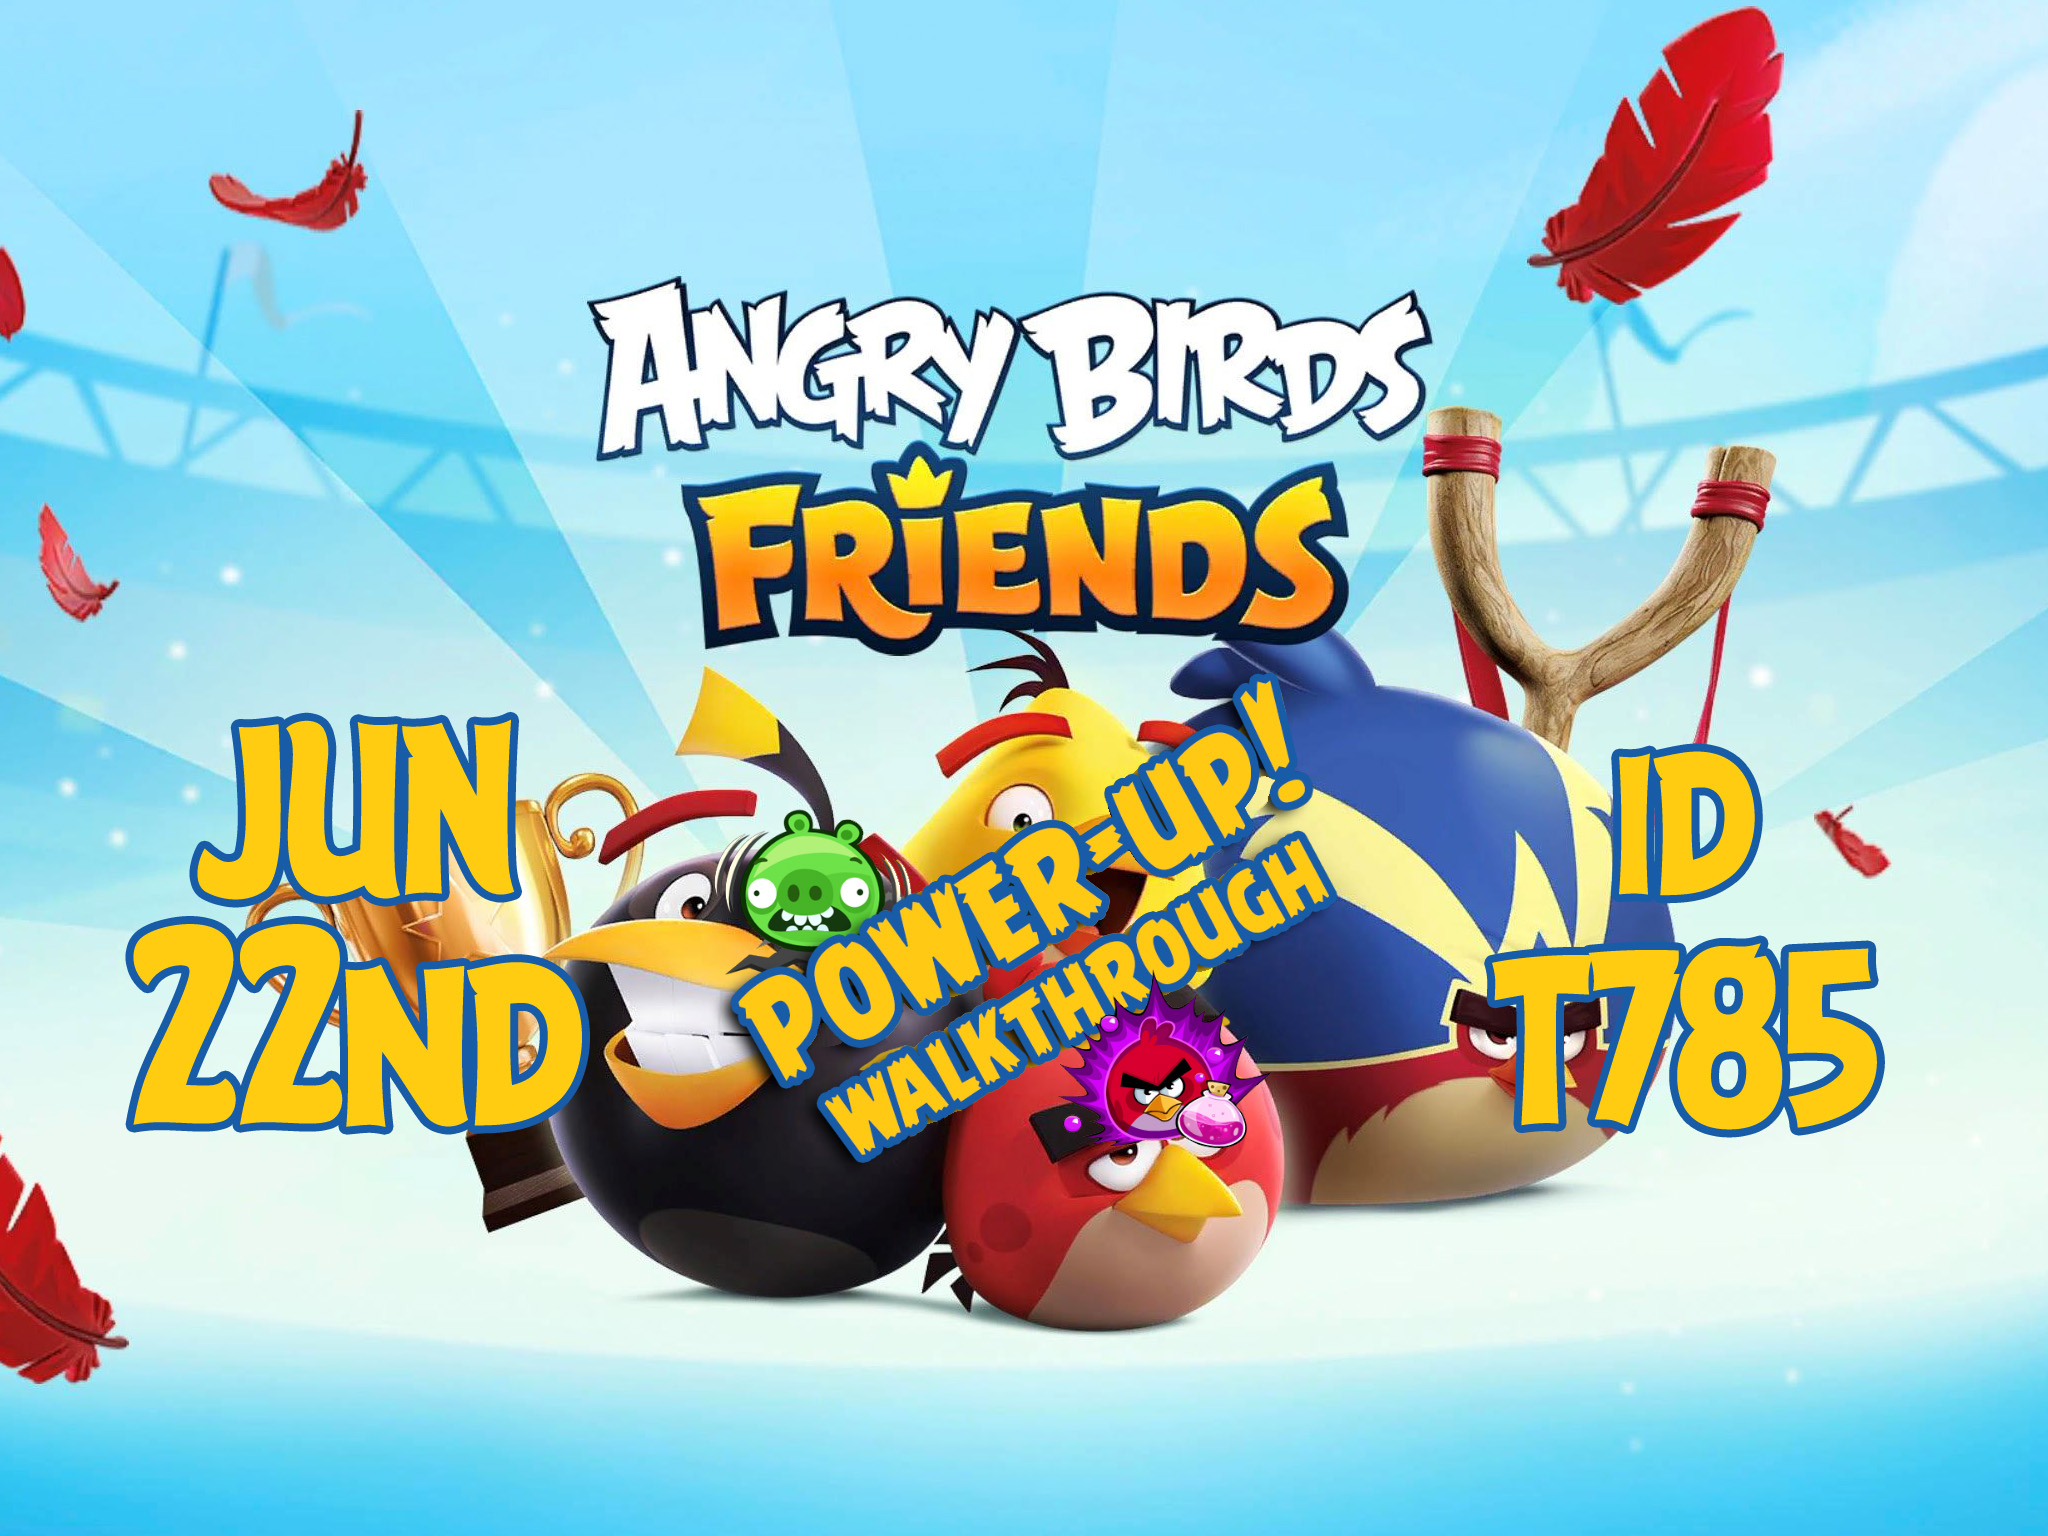 Angry-Birds-Friends-Tournament-T785-Feature-Image-PU